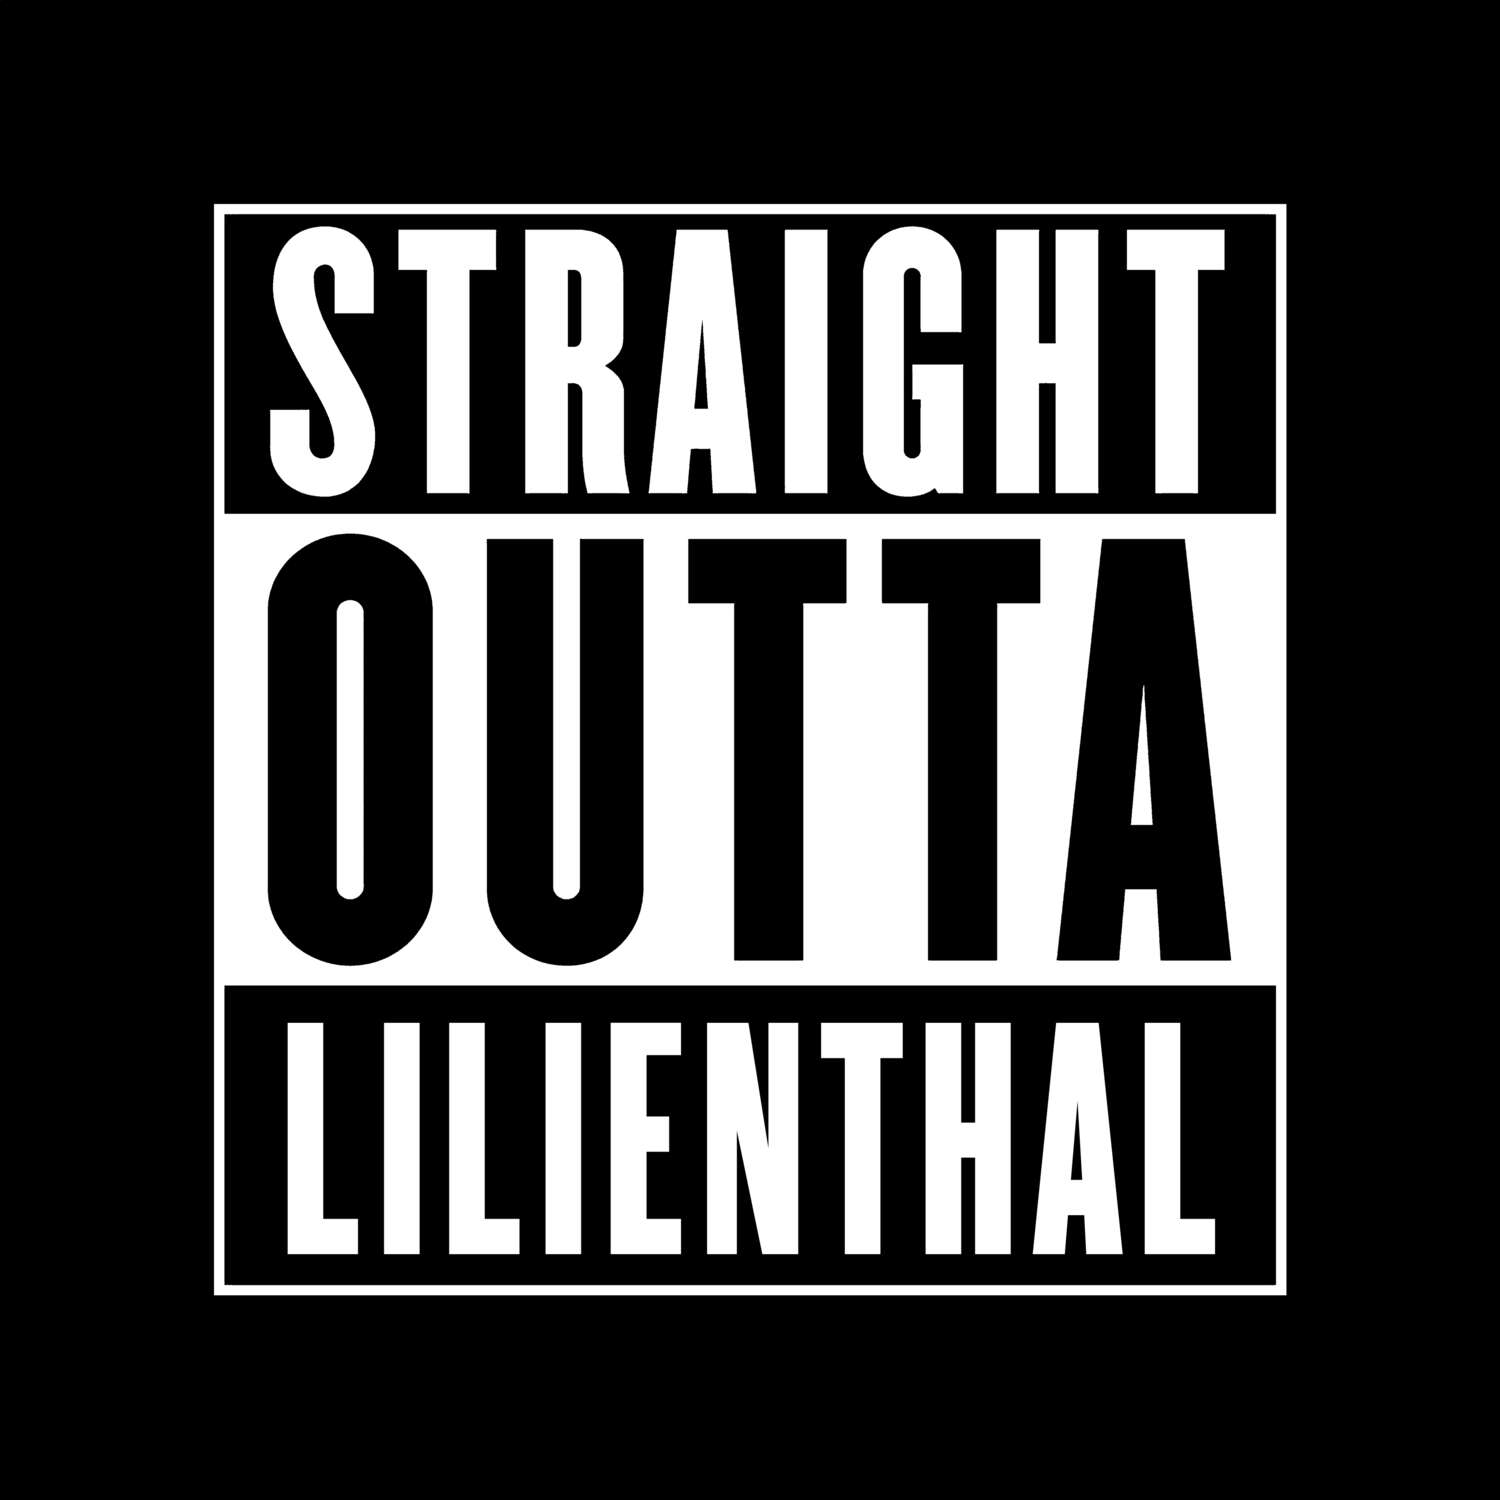 Lilienthal T-Shirt »Straight Outta«